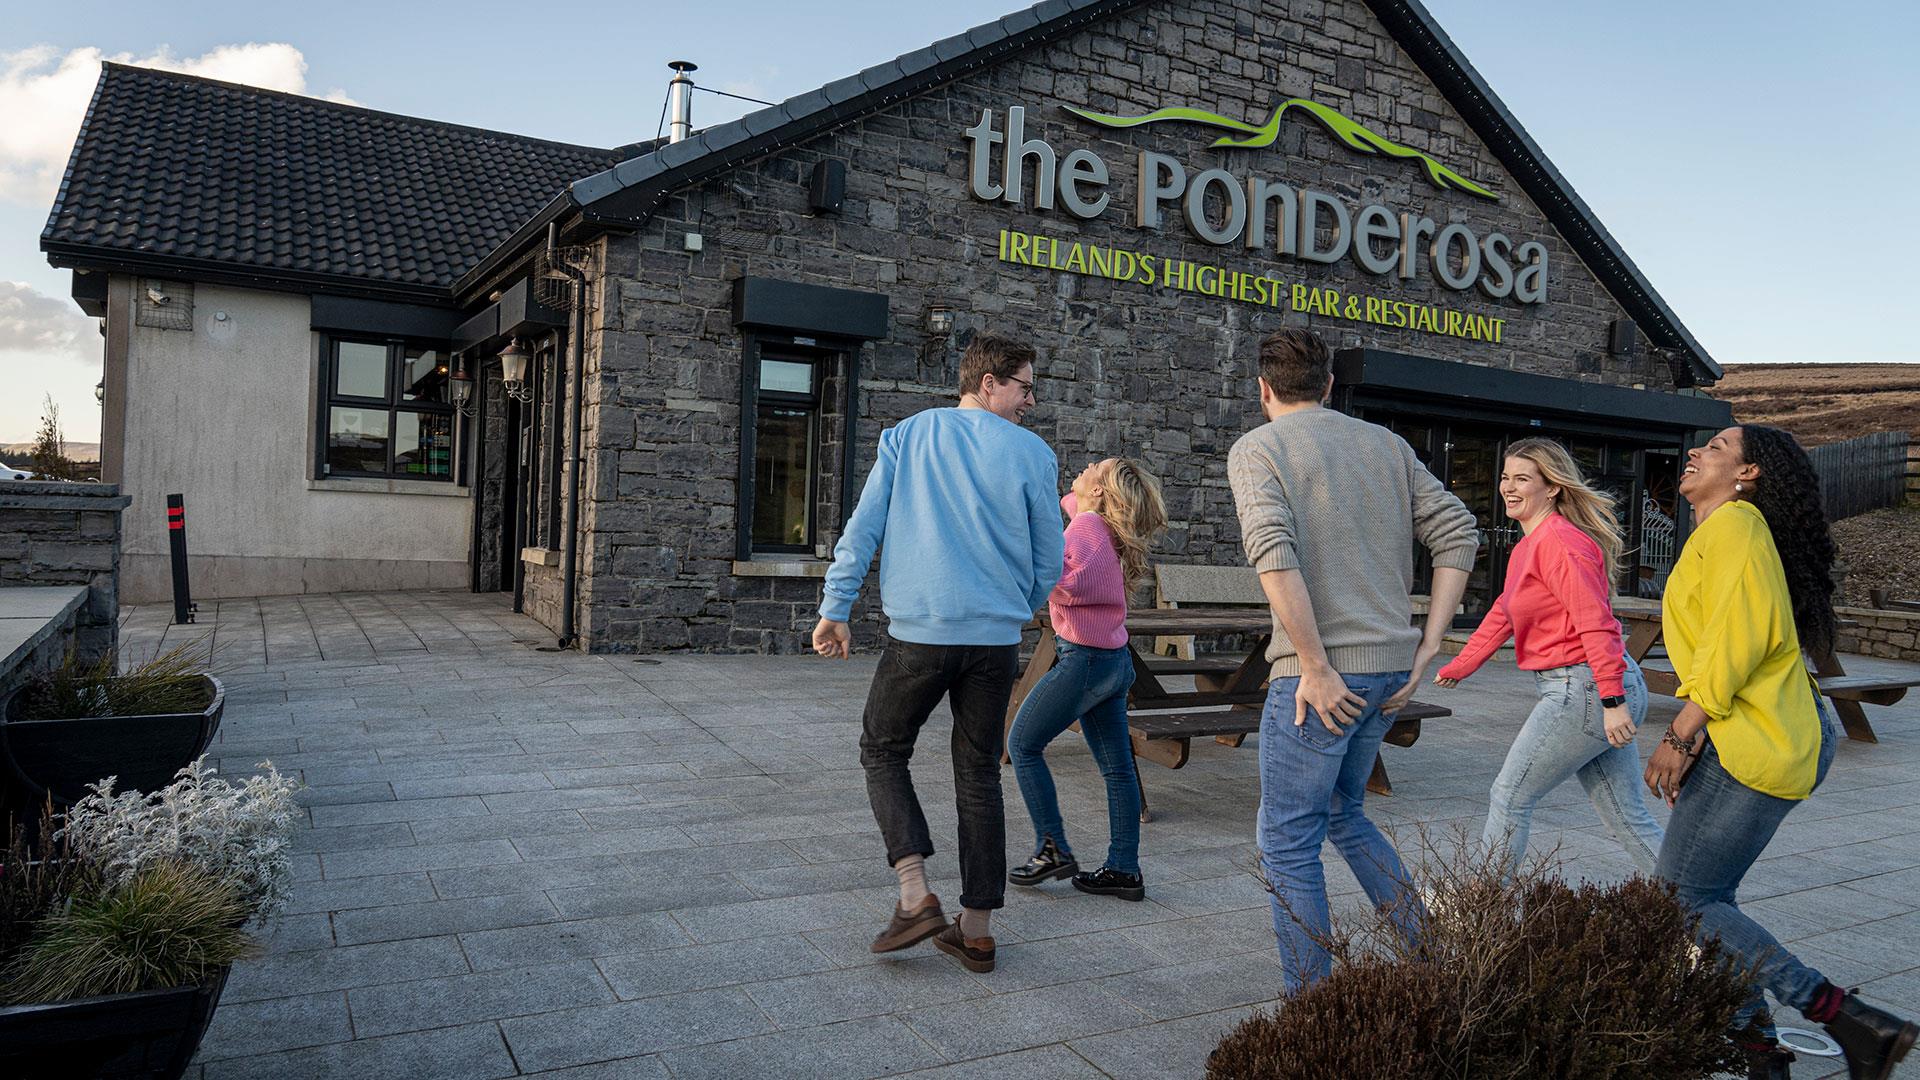 Group arriving at The Ponderosa for the Ceili & Craic experience.